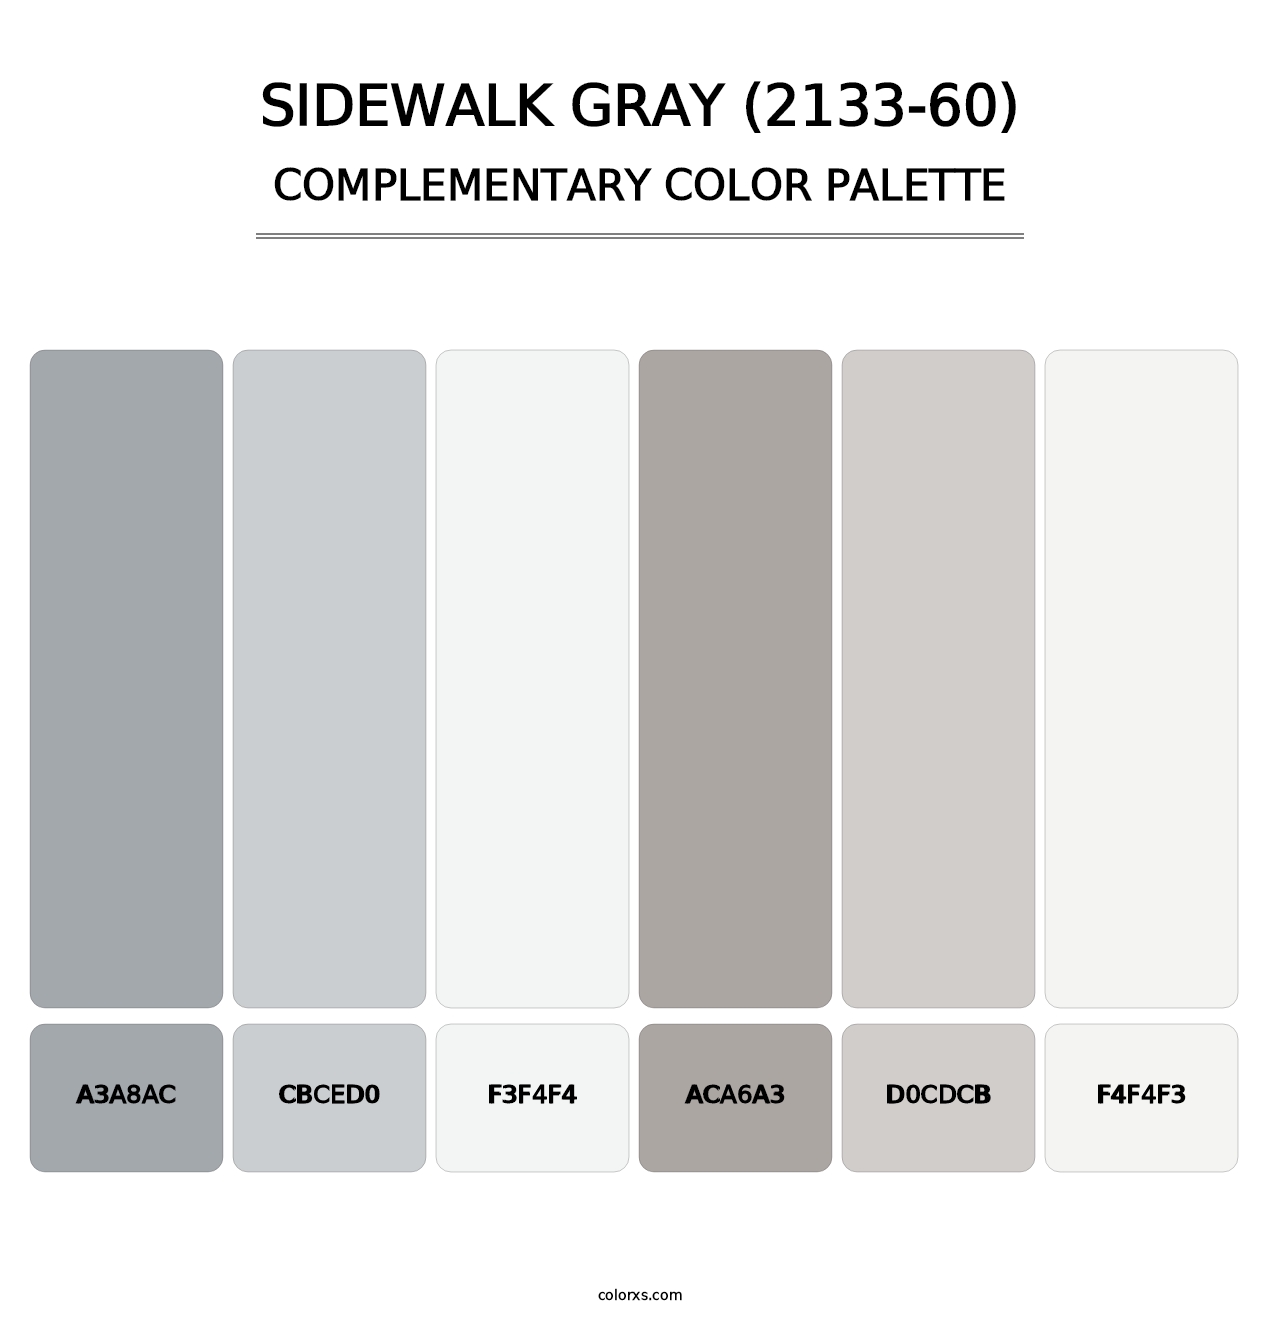 Sidewalk Gray (2133-60) - Complementary Color Palette